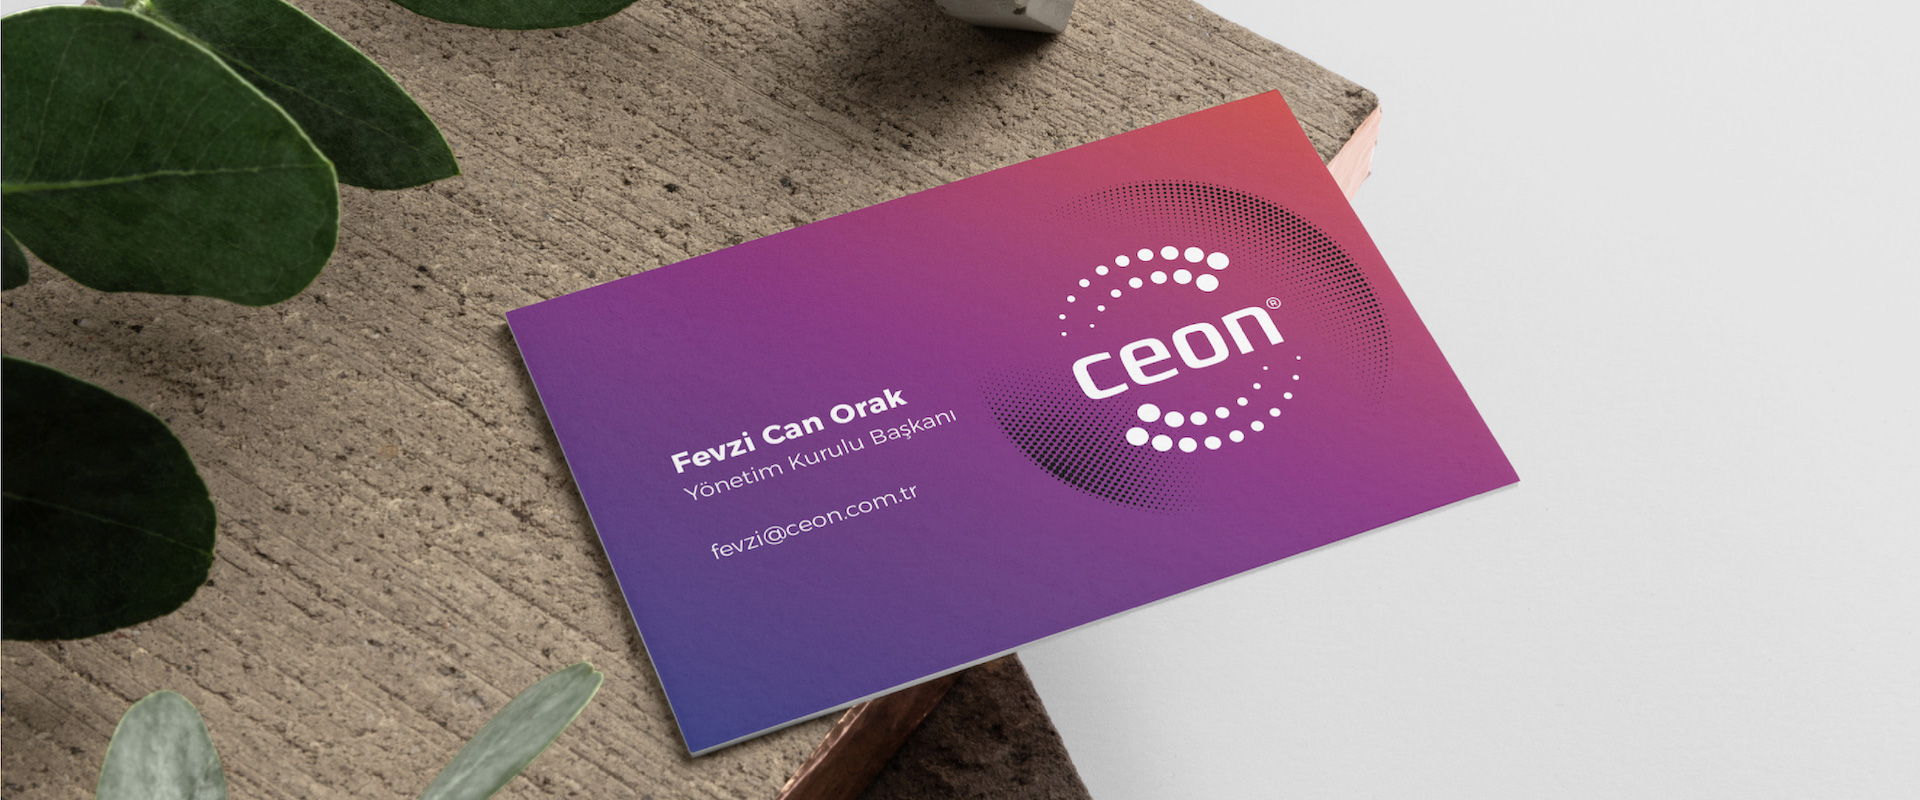 Ceon Agricultural Chemicals - KONSEPTIZ Advertising Agency in Turkey